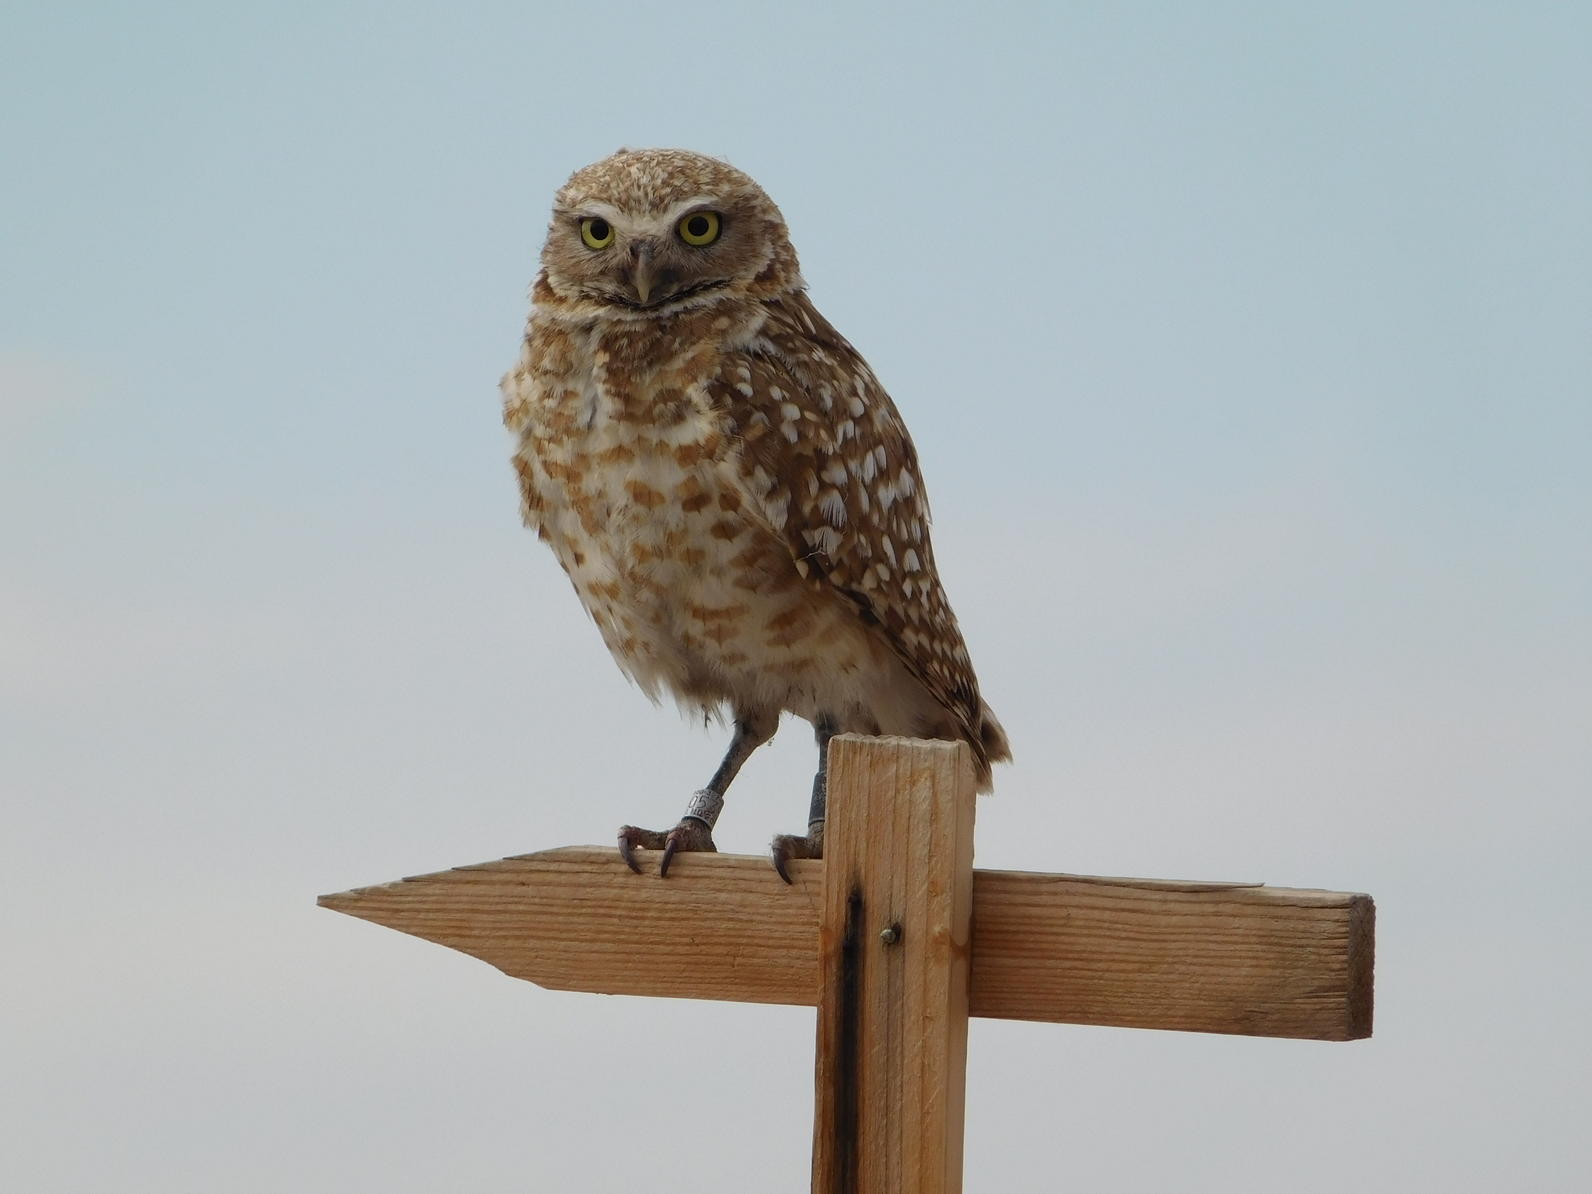 Burrowing Owl on wooden perch